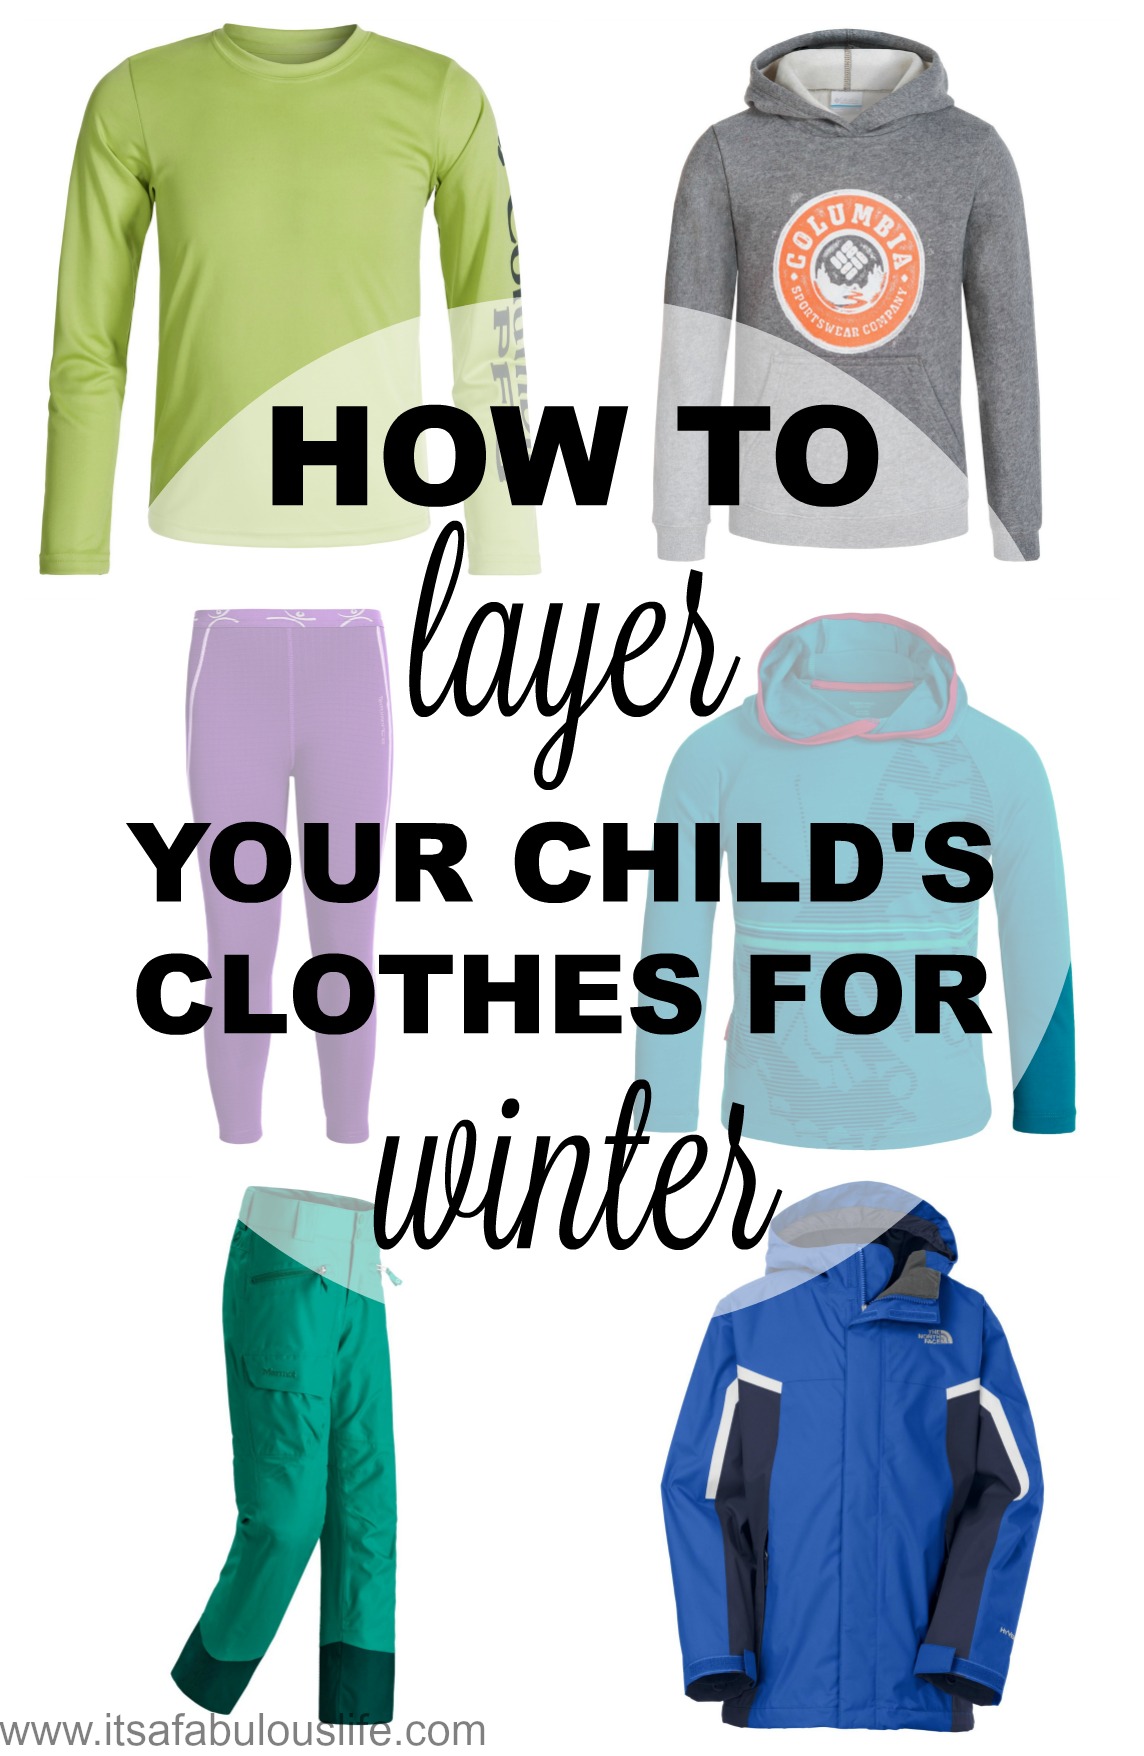 How To Layer Your Child's Clothes For Winter